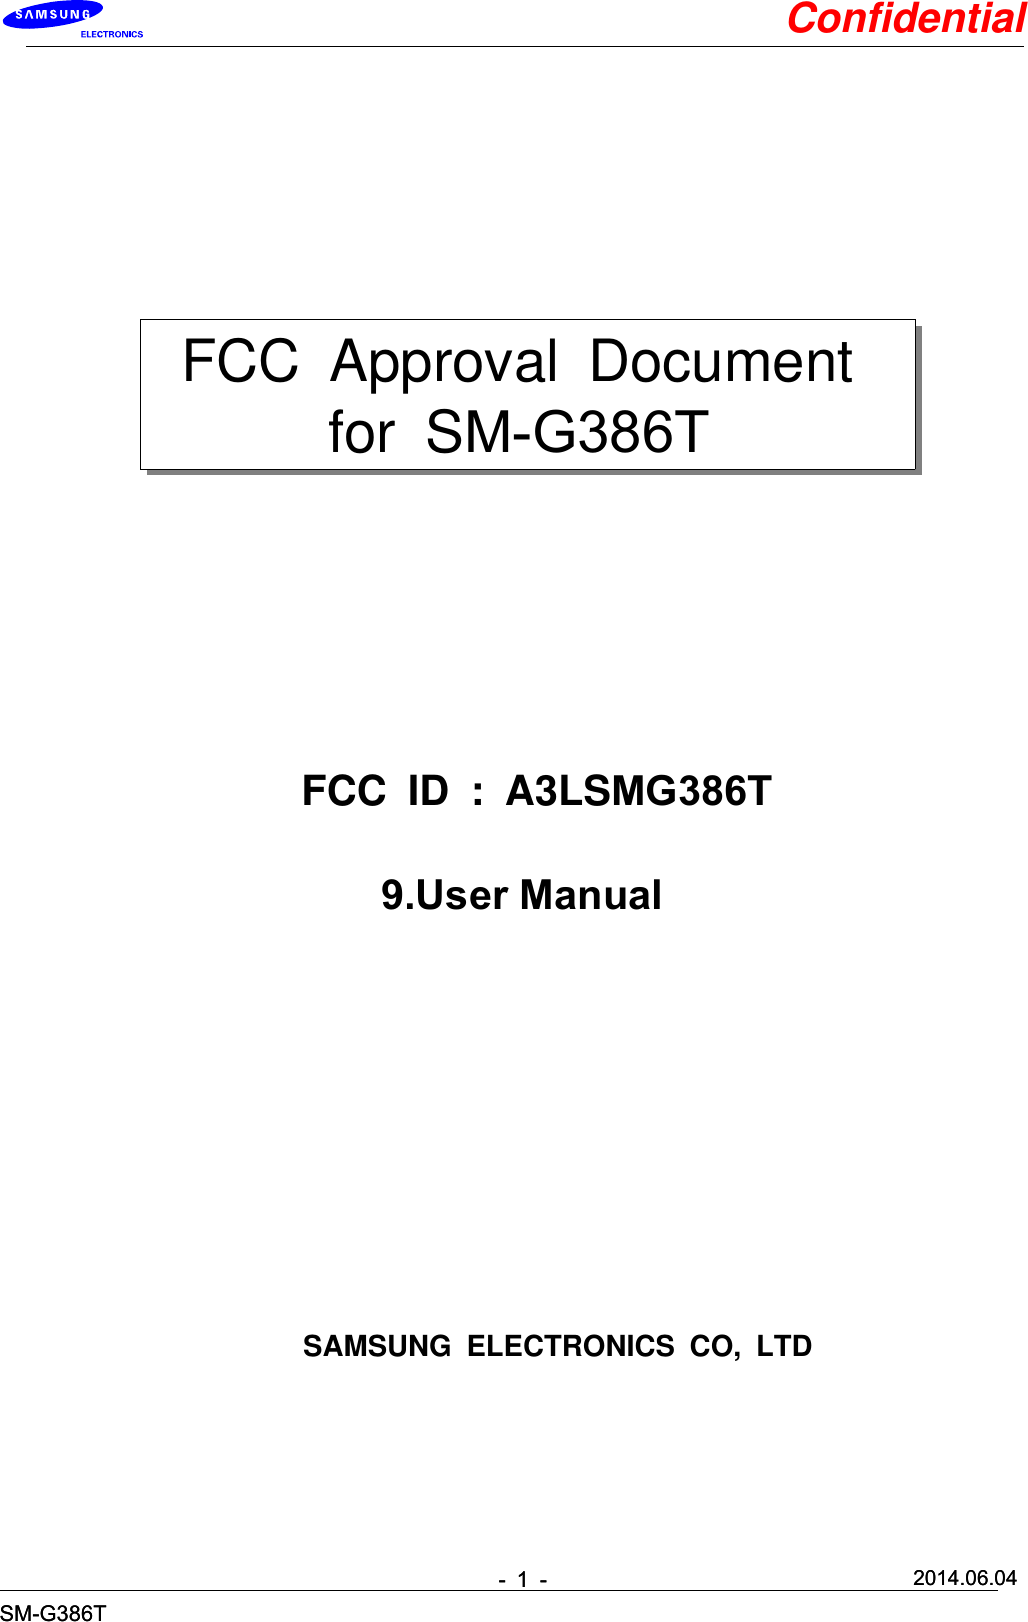 Confidential FCC Approval Document for SM-G386T   FCC ID :A3LSMG386T     9.User Manual  SAMSUNG ELECTRONICS CO, LTDSM-G386T2014.06.04-1-SM-G386T2014.06.04-1-